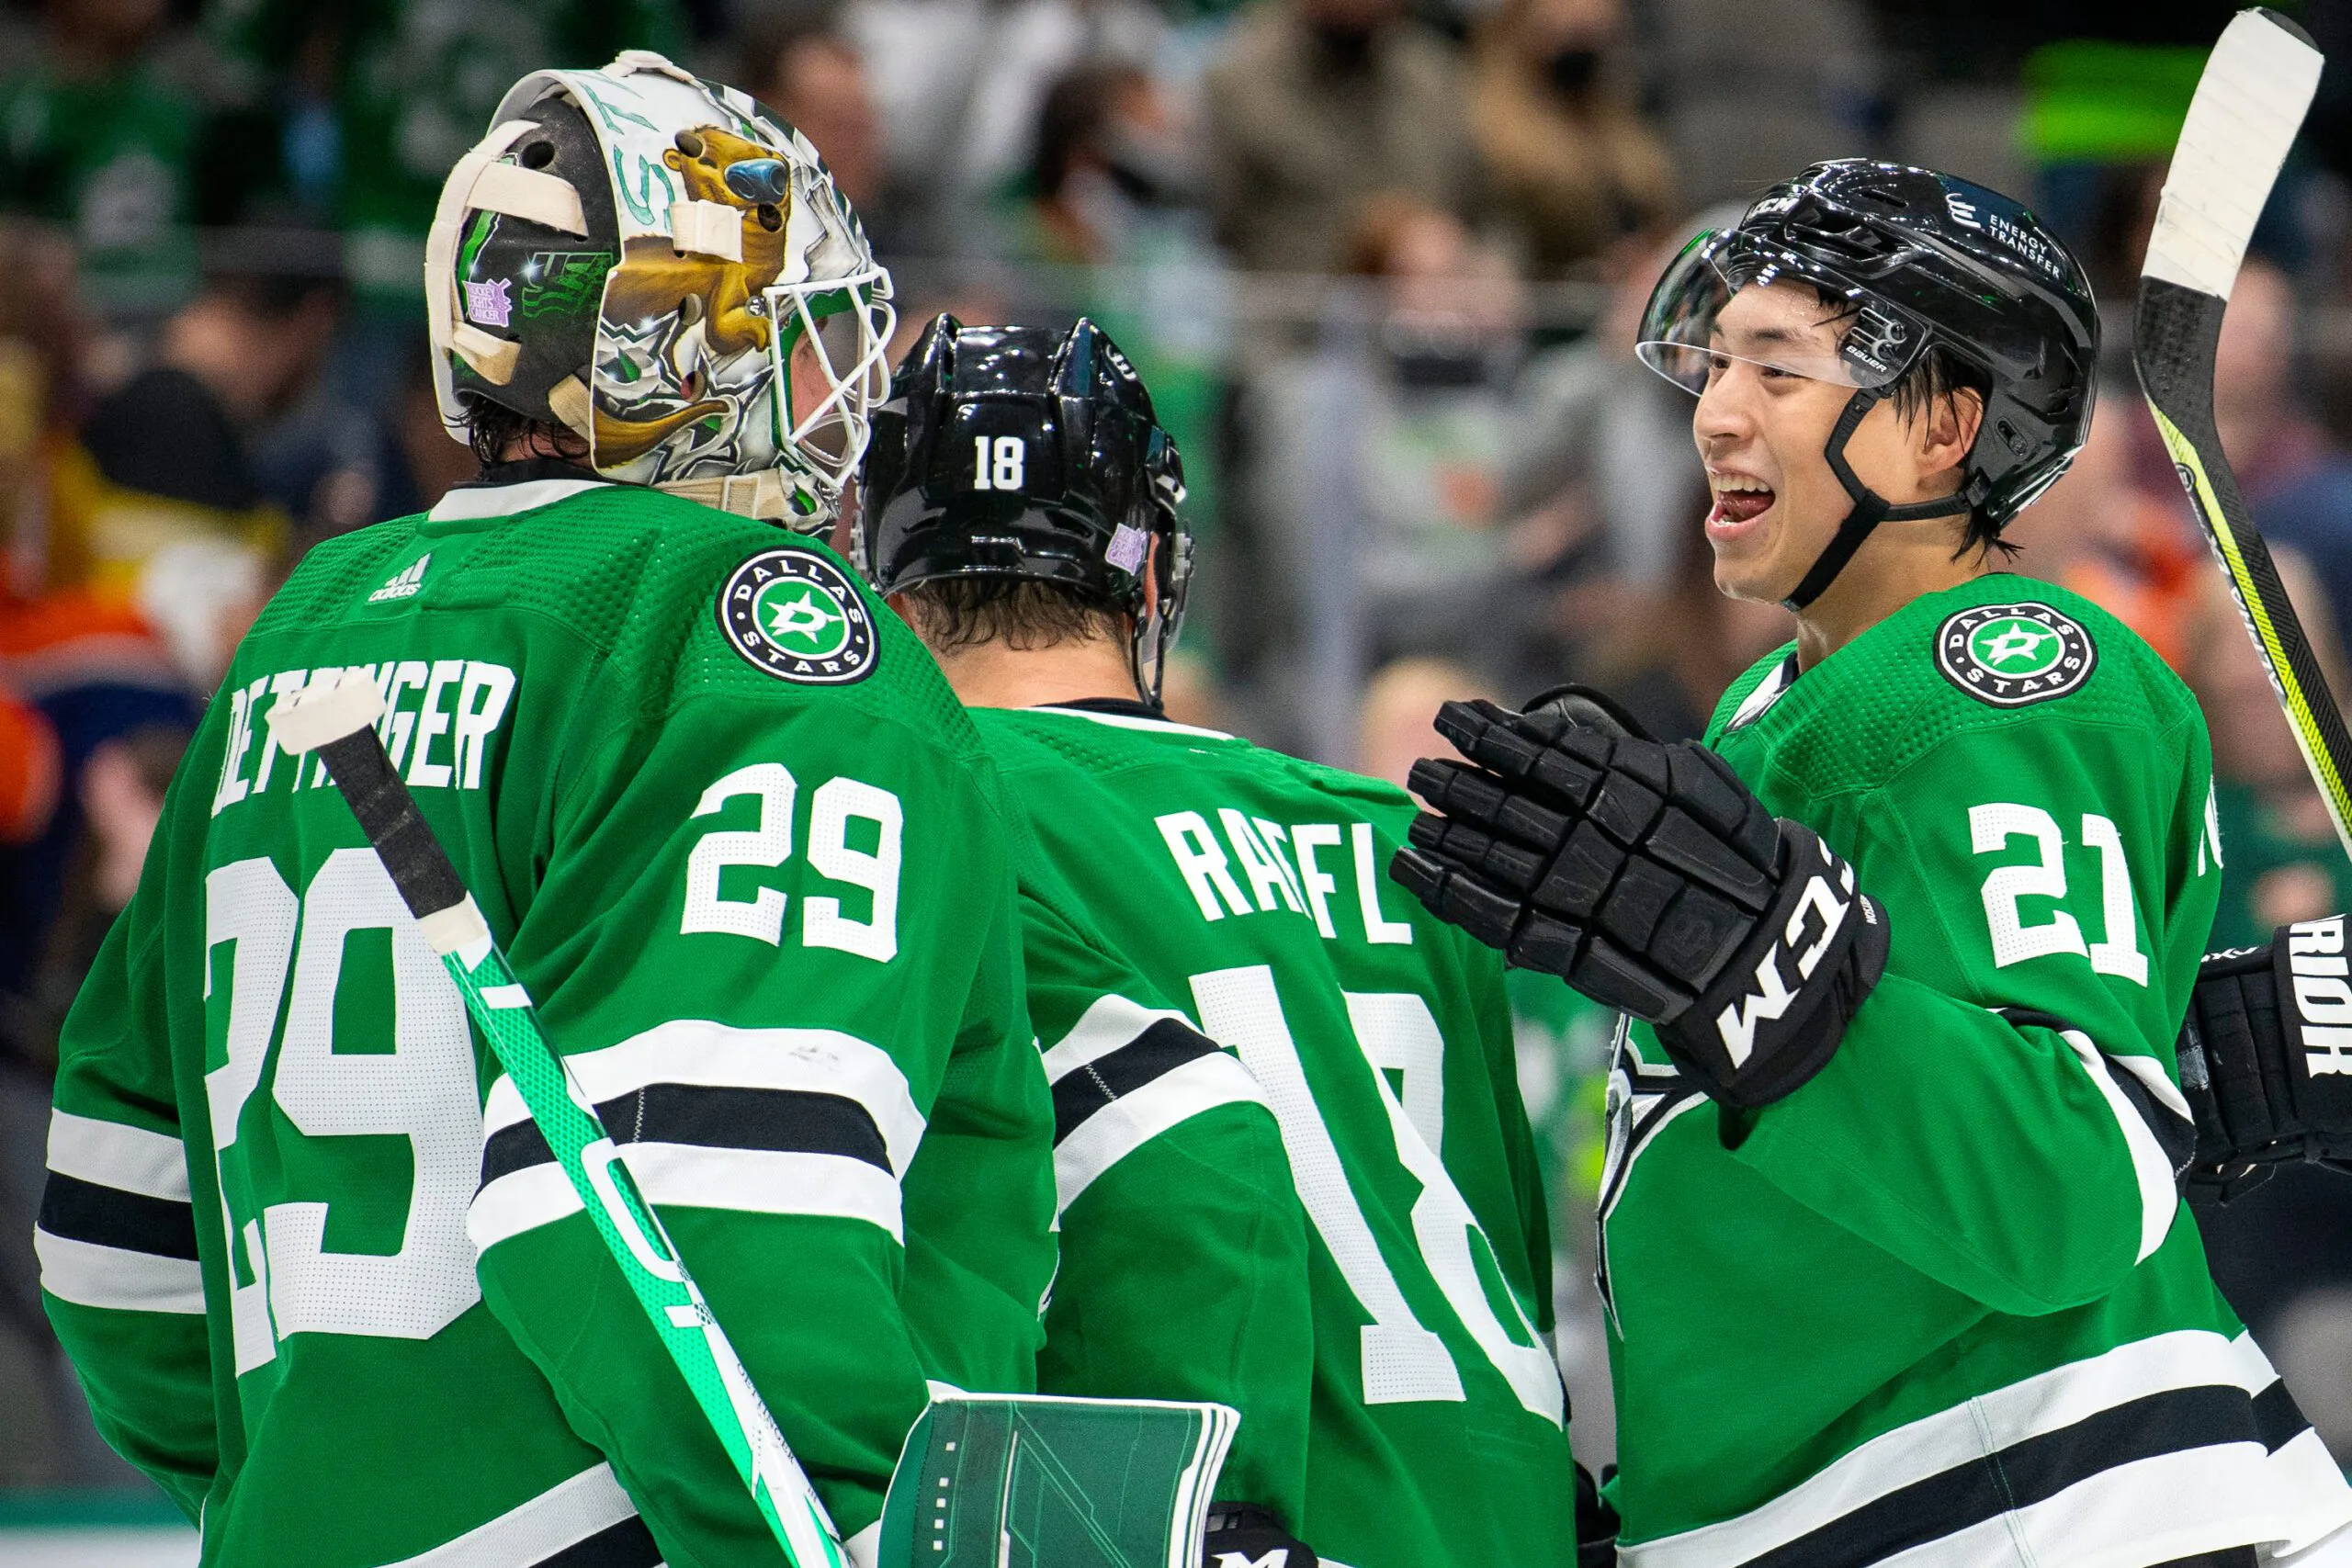 Dallas Stars’ success at the NHL Draft is turning them into a legit Stanley Cup contender